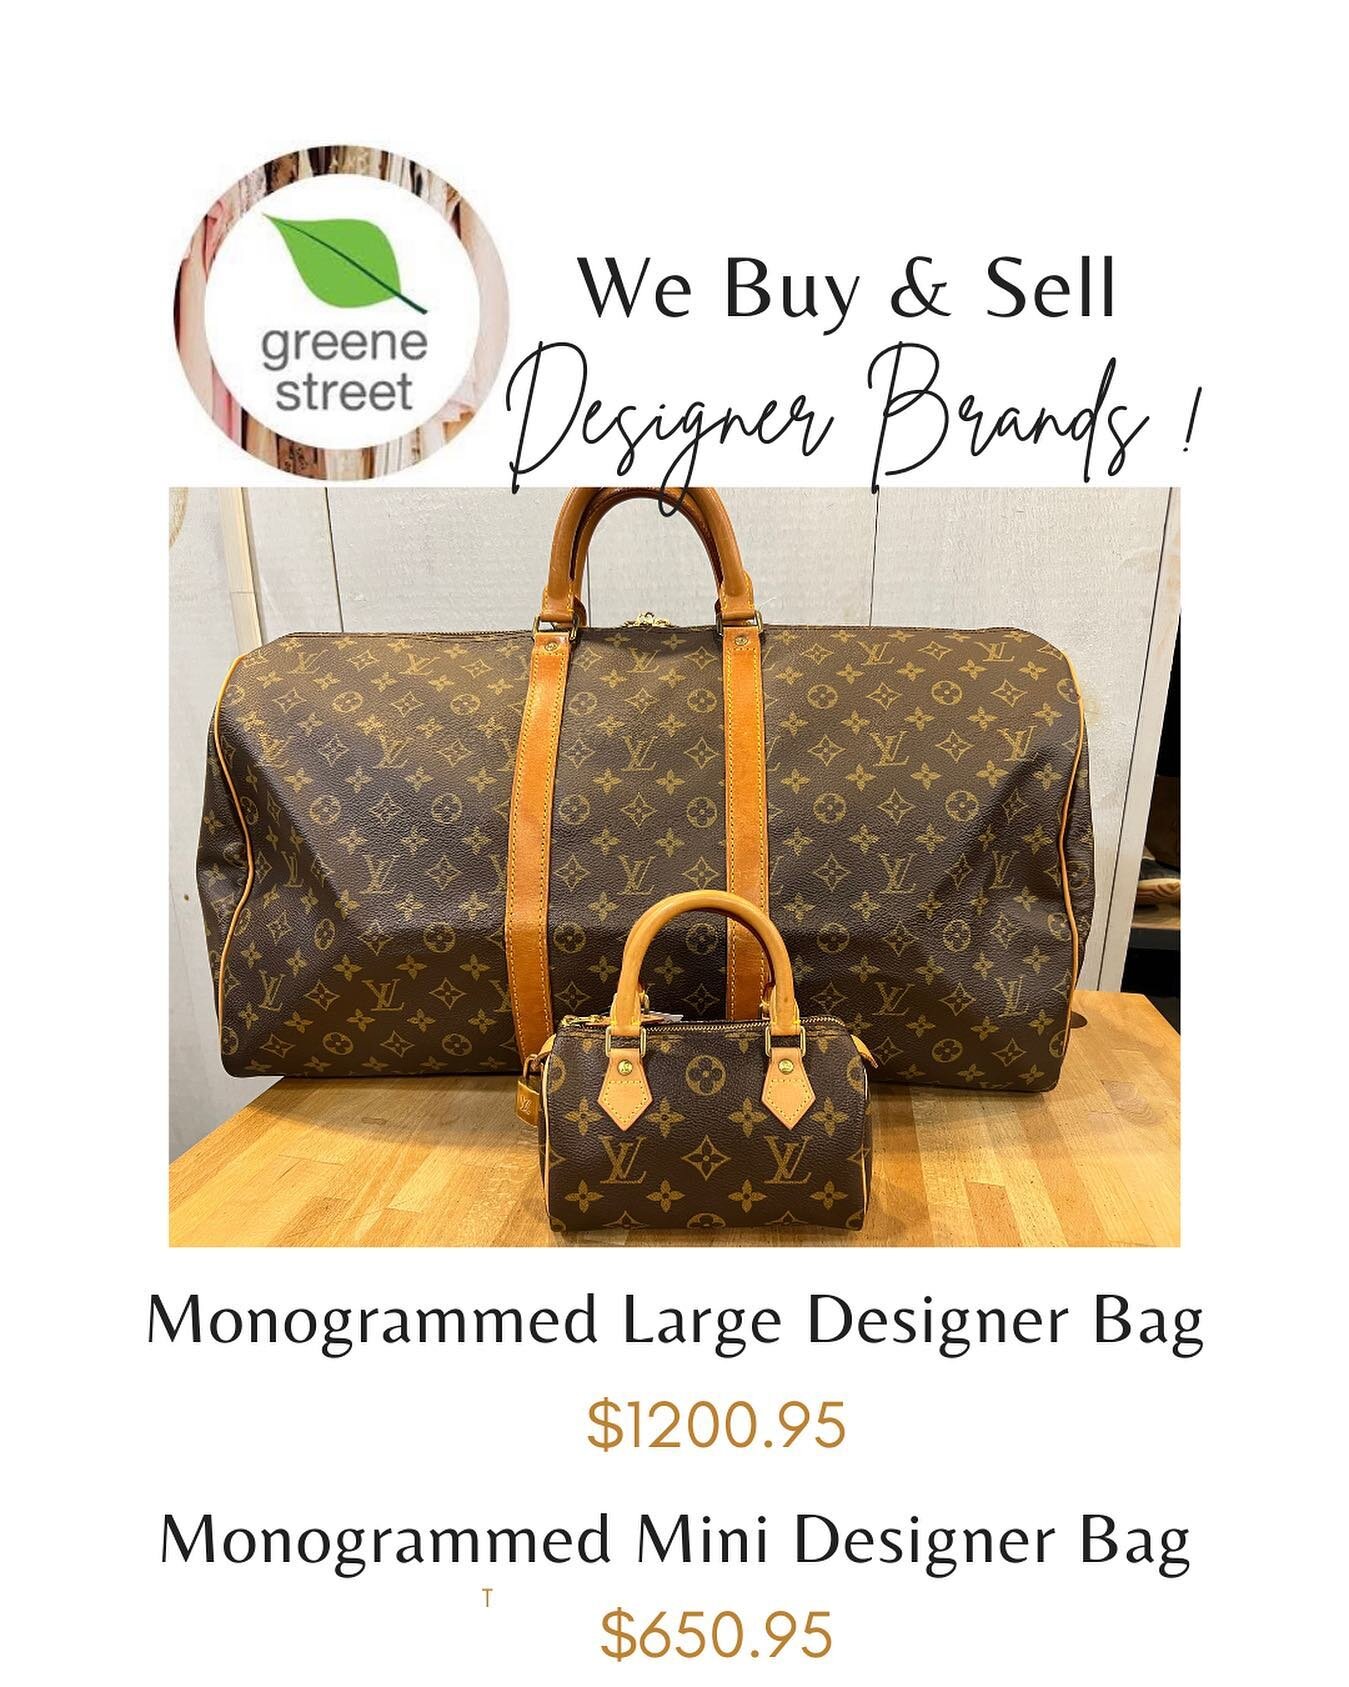 The Designer Jet Set Duo
Large Bag ✈️ $1200.95
Mini Bag ☝🏼$650.95

@greenestreetgateway to purchase.
🧐 Inquiries? 💝 Connect with us!
📞 (484) 367-7412
📧 gateway@greenestreet.com

@greenestreetgateway is not affiliated with the brands we sell. All